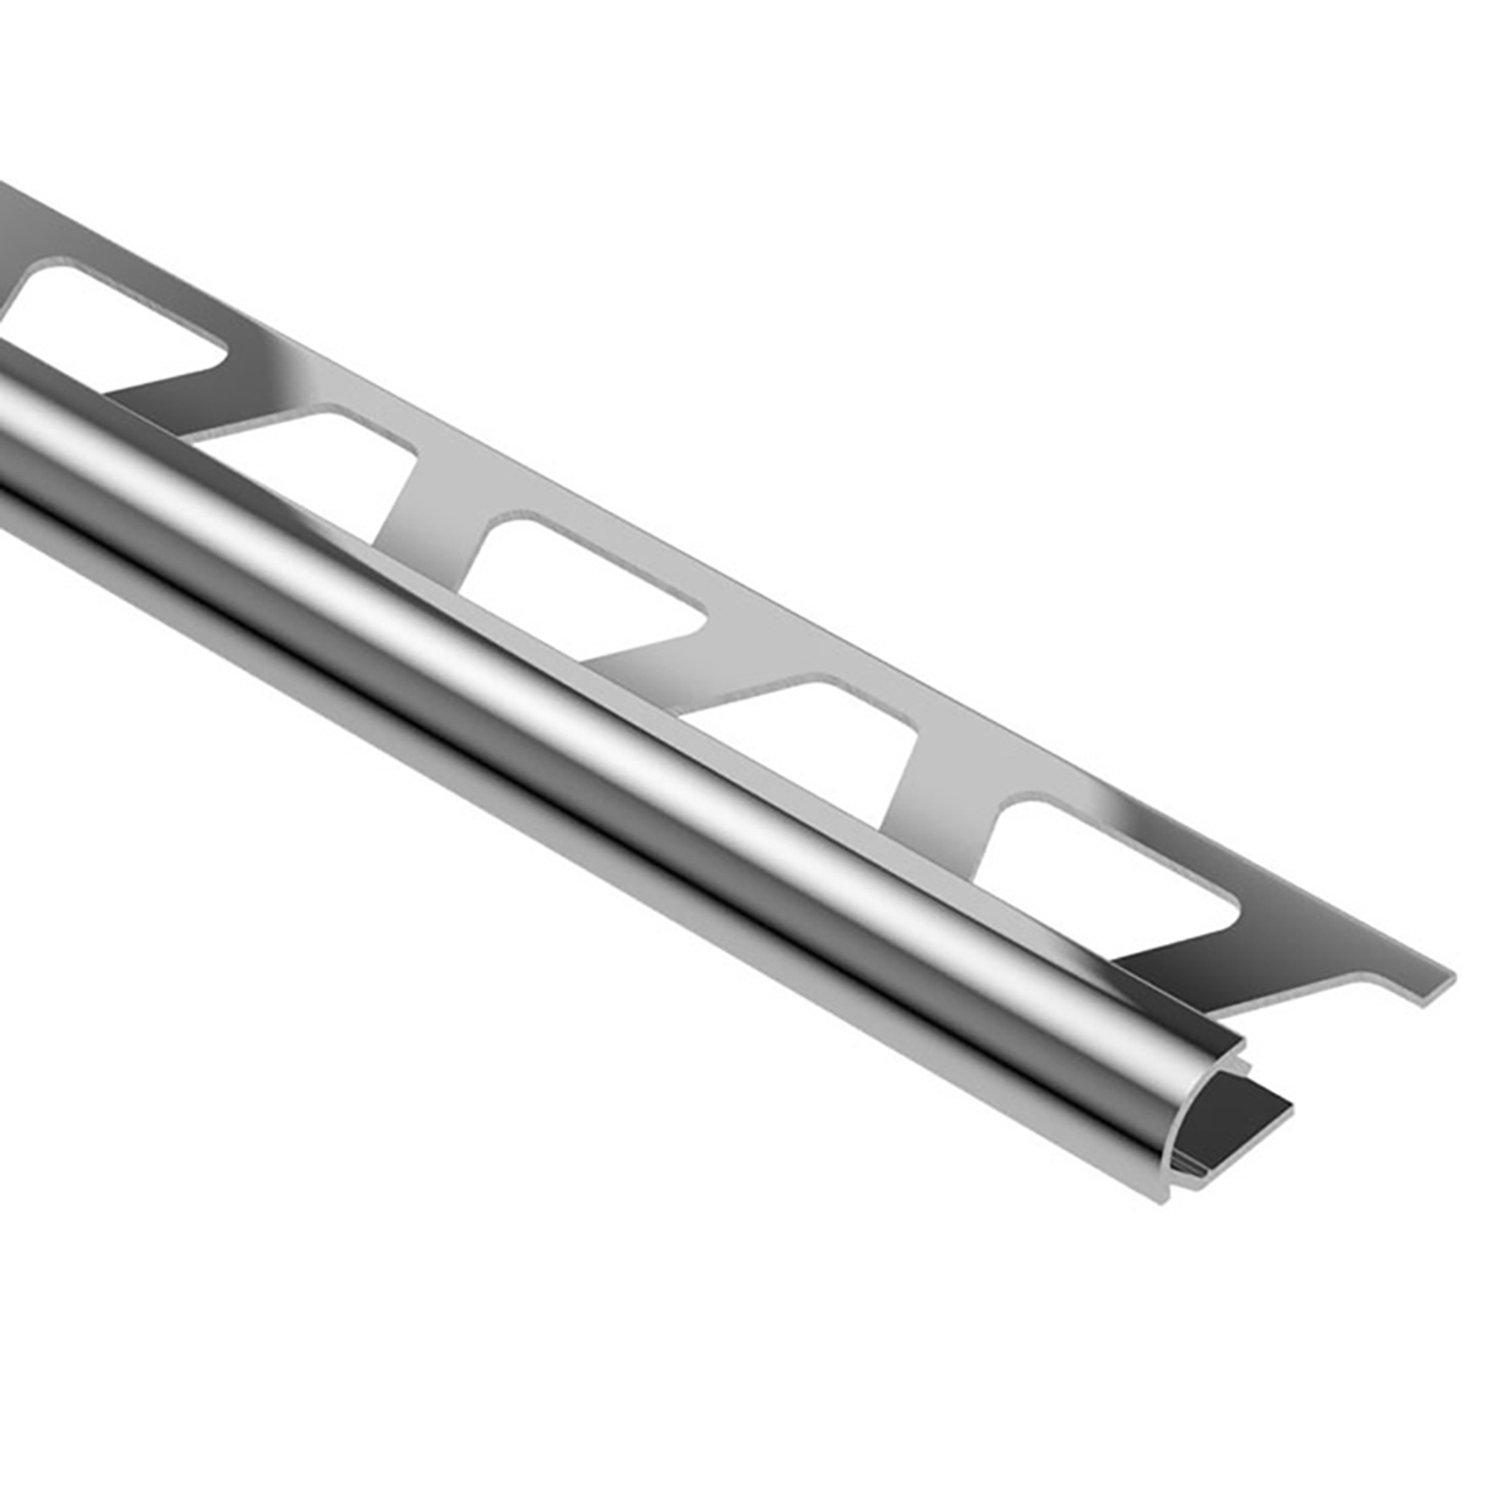 Schluter-Rondec Bullnose Edge Trim 5/16in. in Polished Chrome Anodized Aluminum